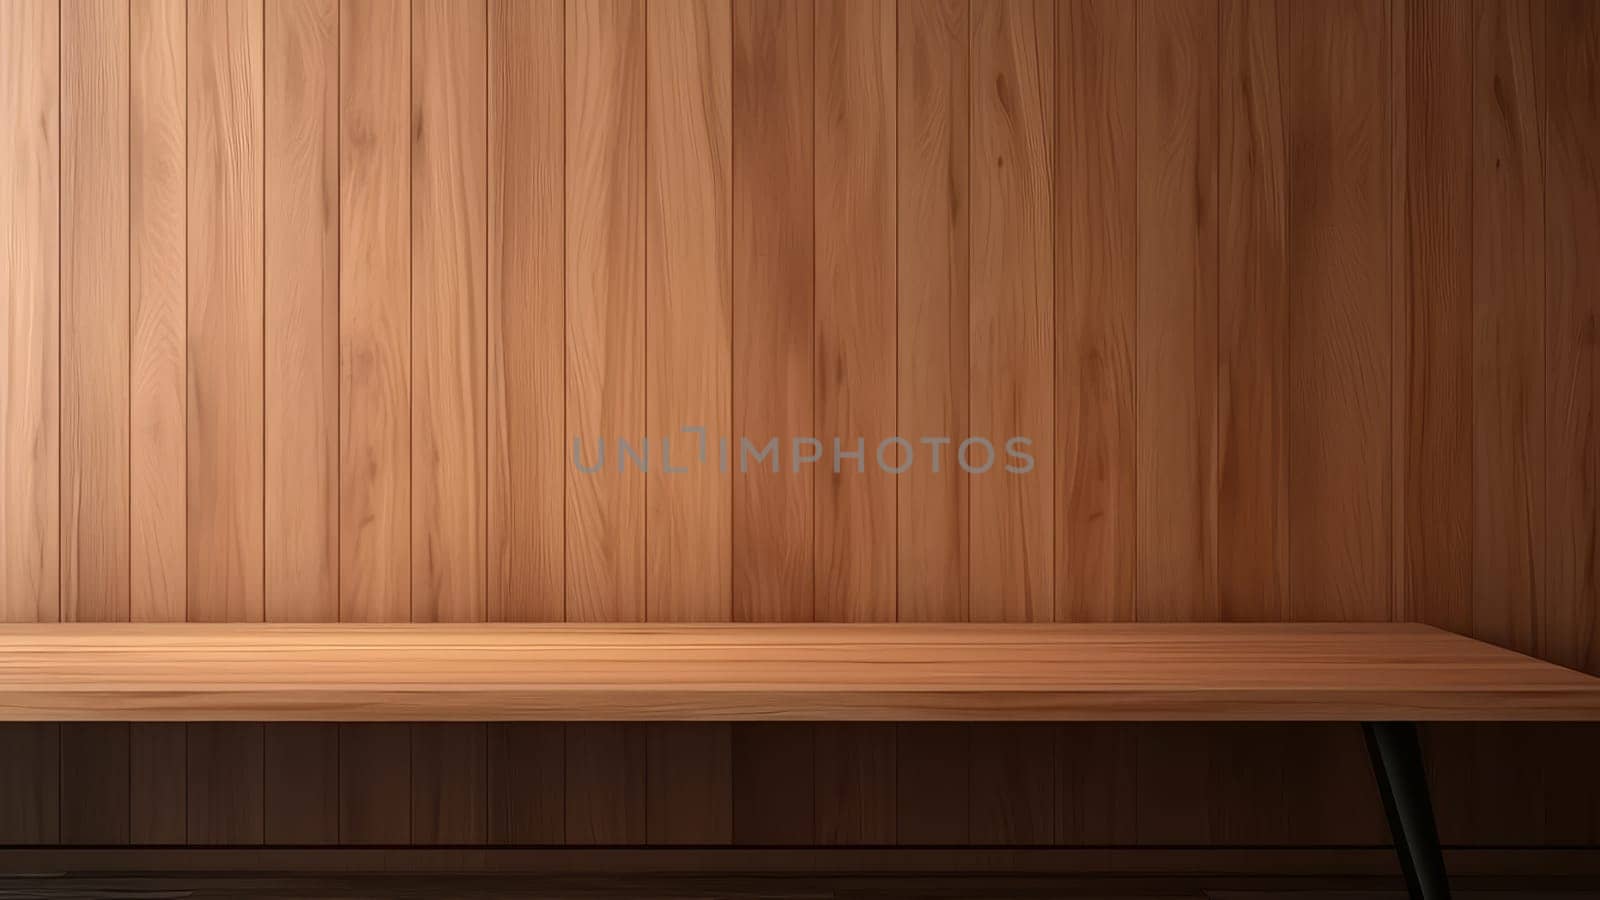 3D rendering of a potted plant, built-in wooden shelving on wooden wall background in living room.